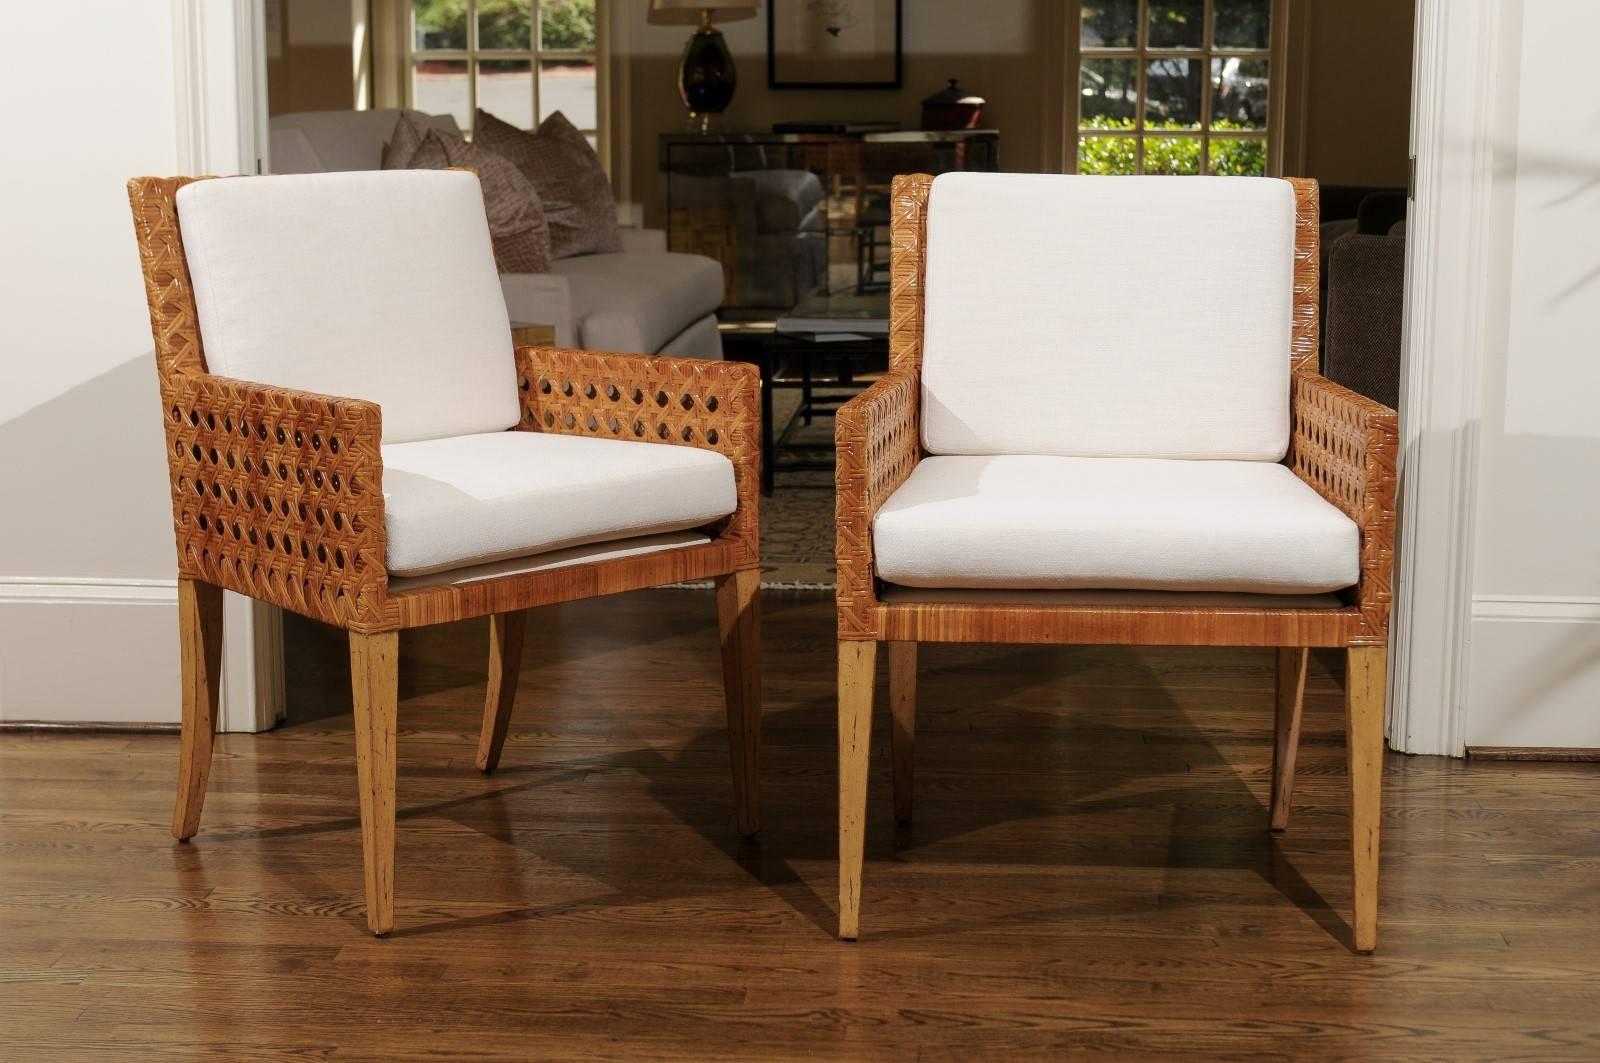 A exceptional pair large-scale arm or dining chairs, circa 1975. Stout hardwood frame construction painstakingly wrapped in double-sided cane. Fabulous quality and detail. Aged to absolute perfection. Exquisite jewelry! Excellent restored condition.